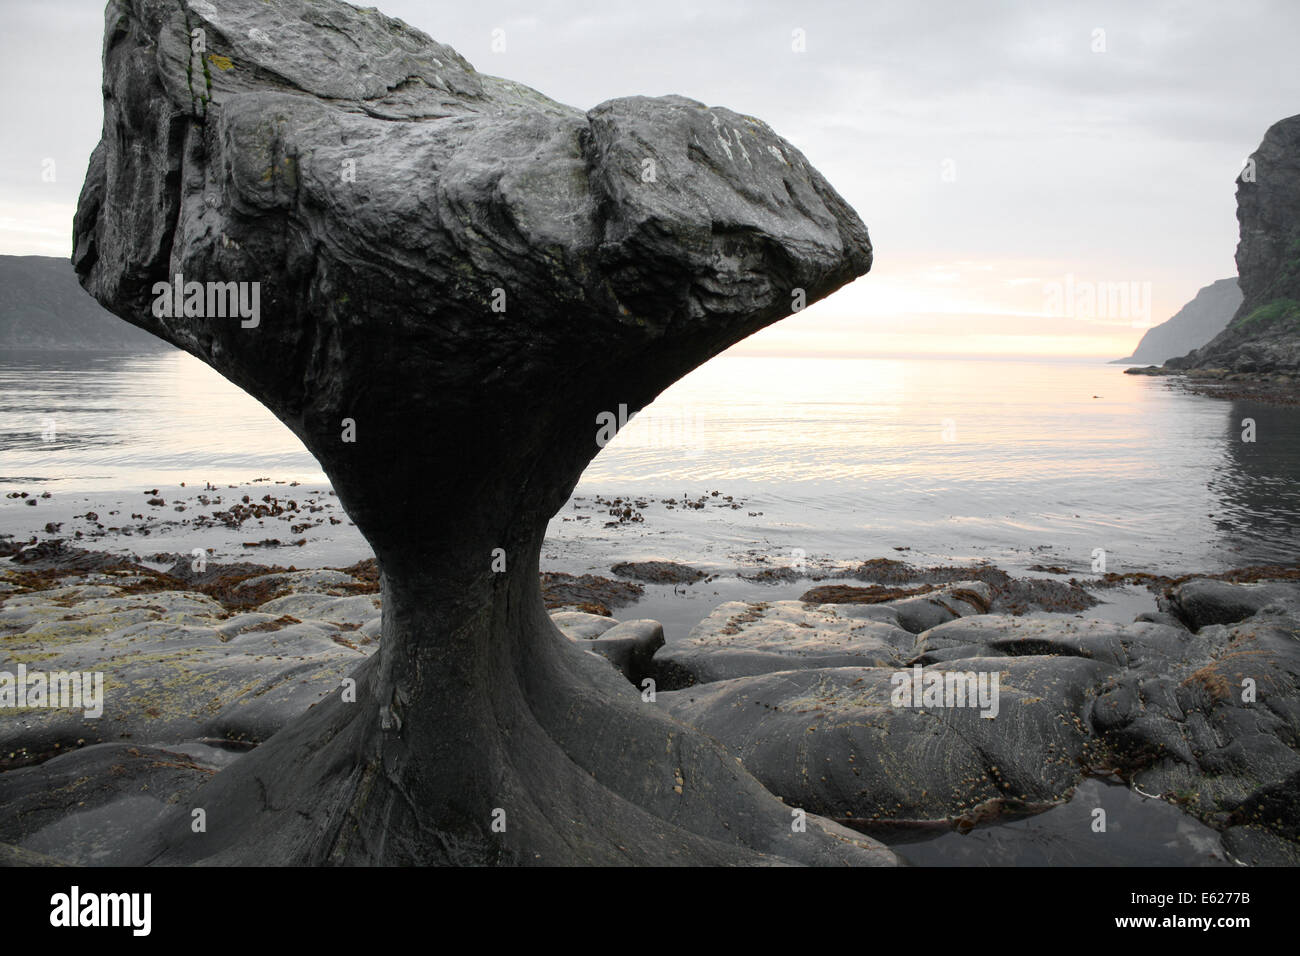 A stone carved out by the sea in Mo I Rana Norway. Stock Photo